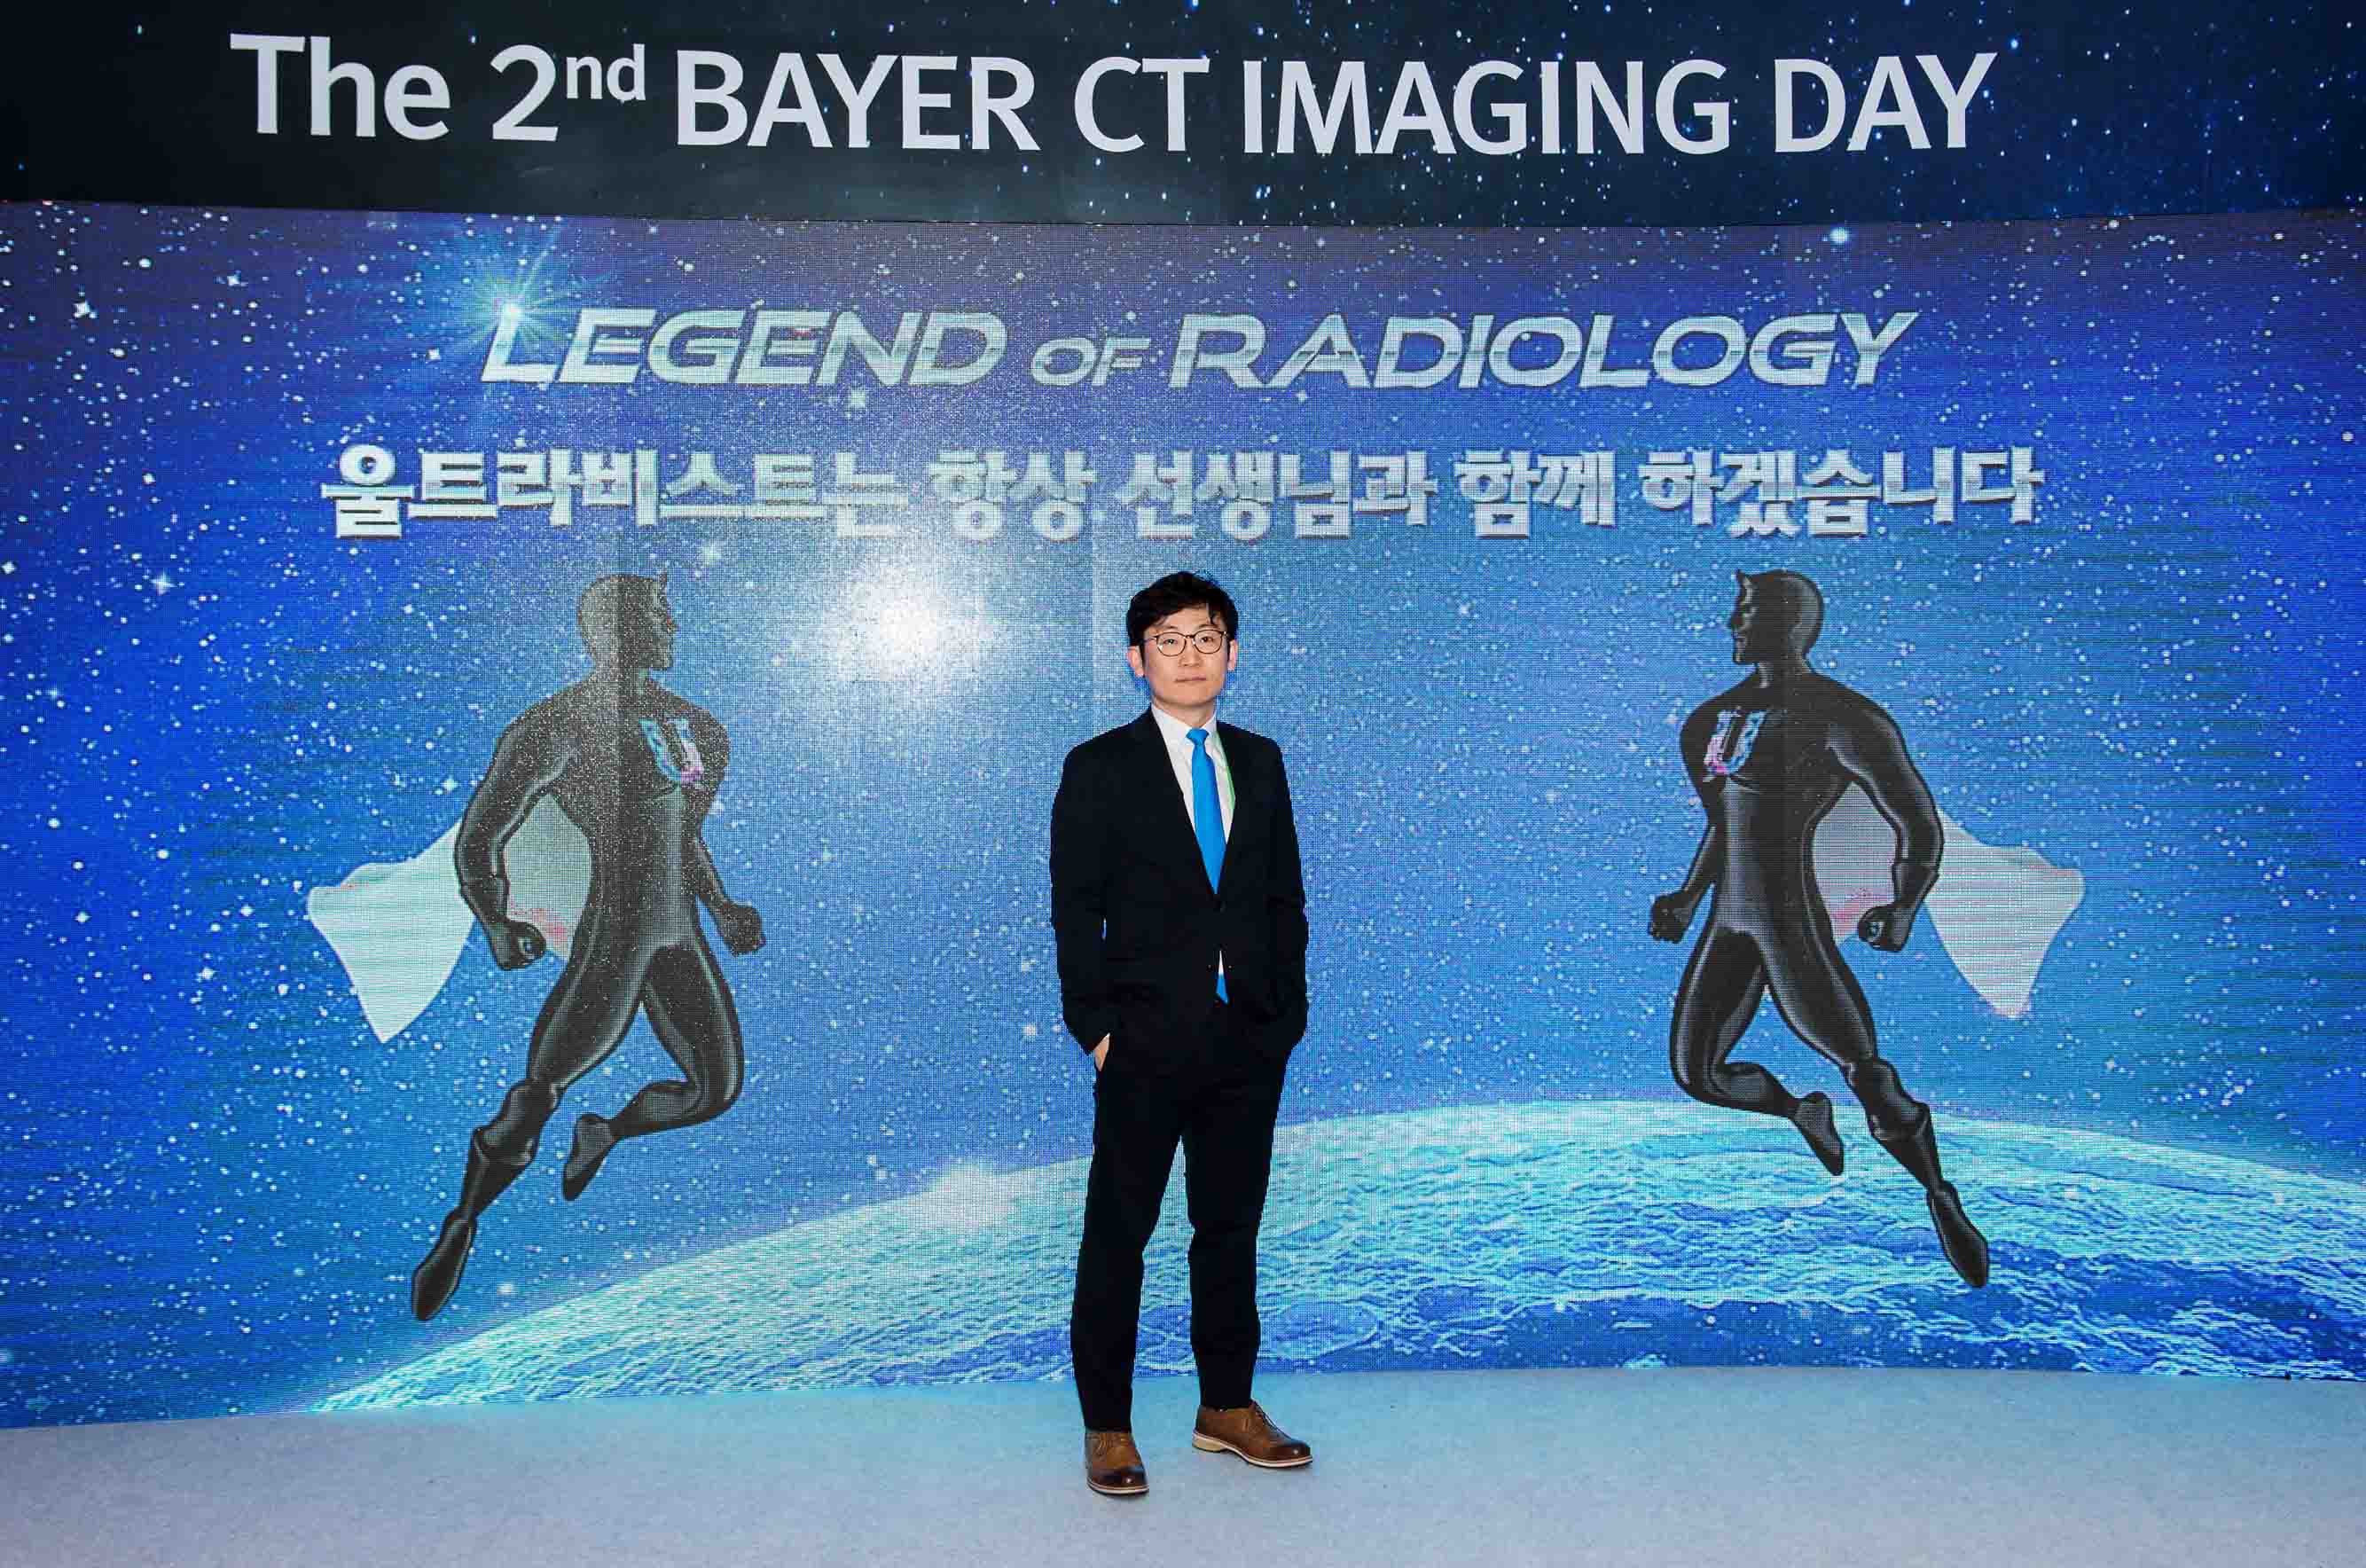 CT Imaging Day 2018